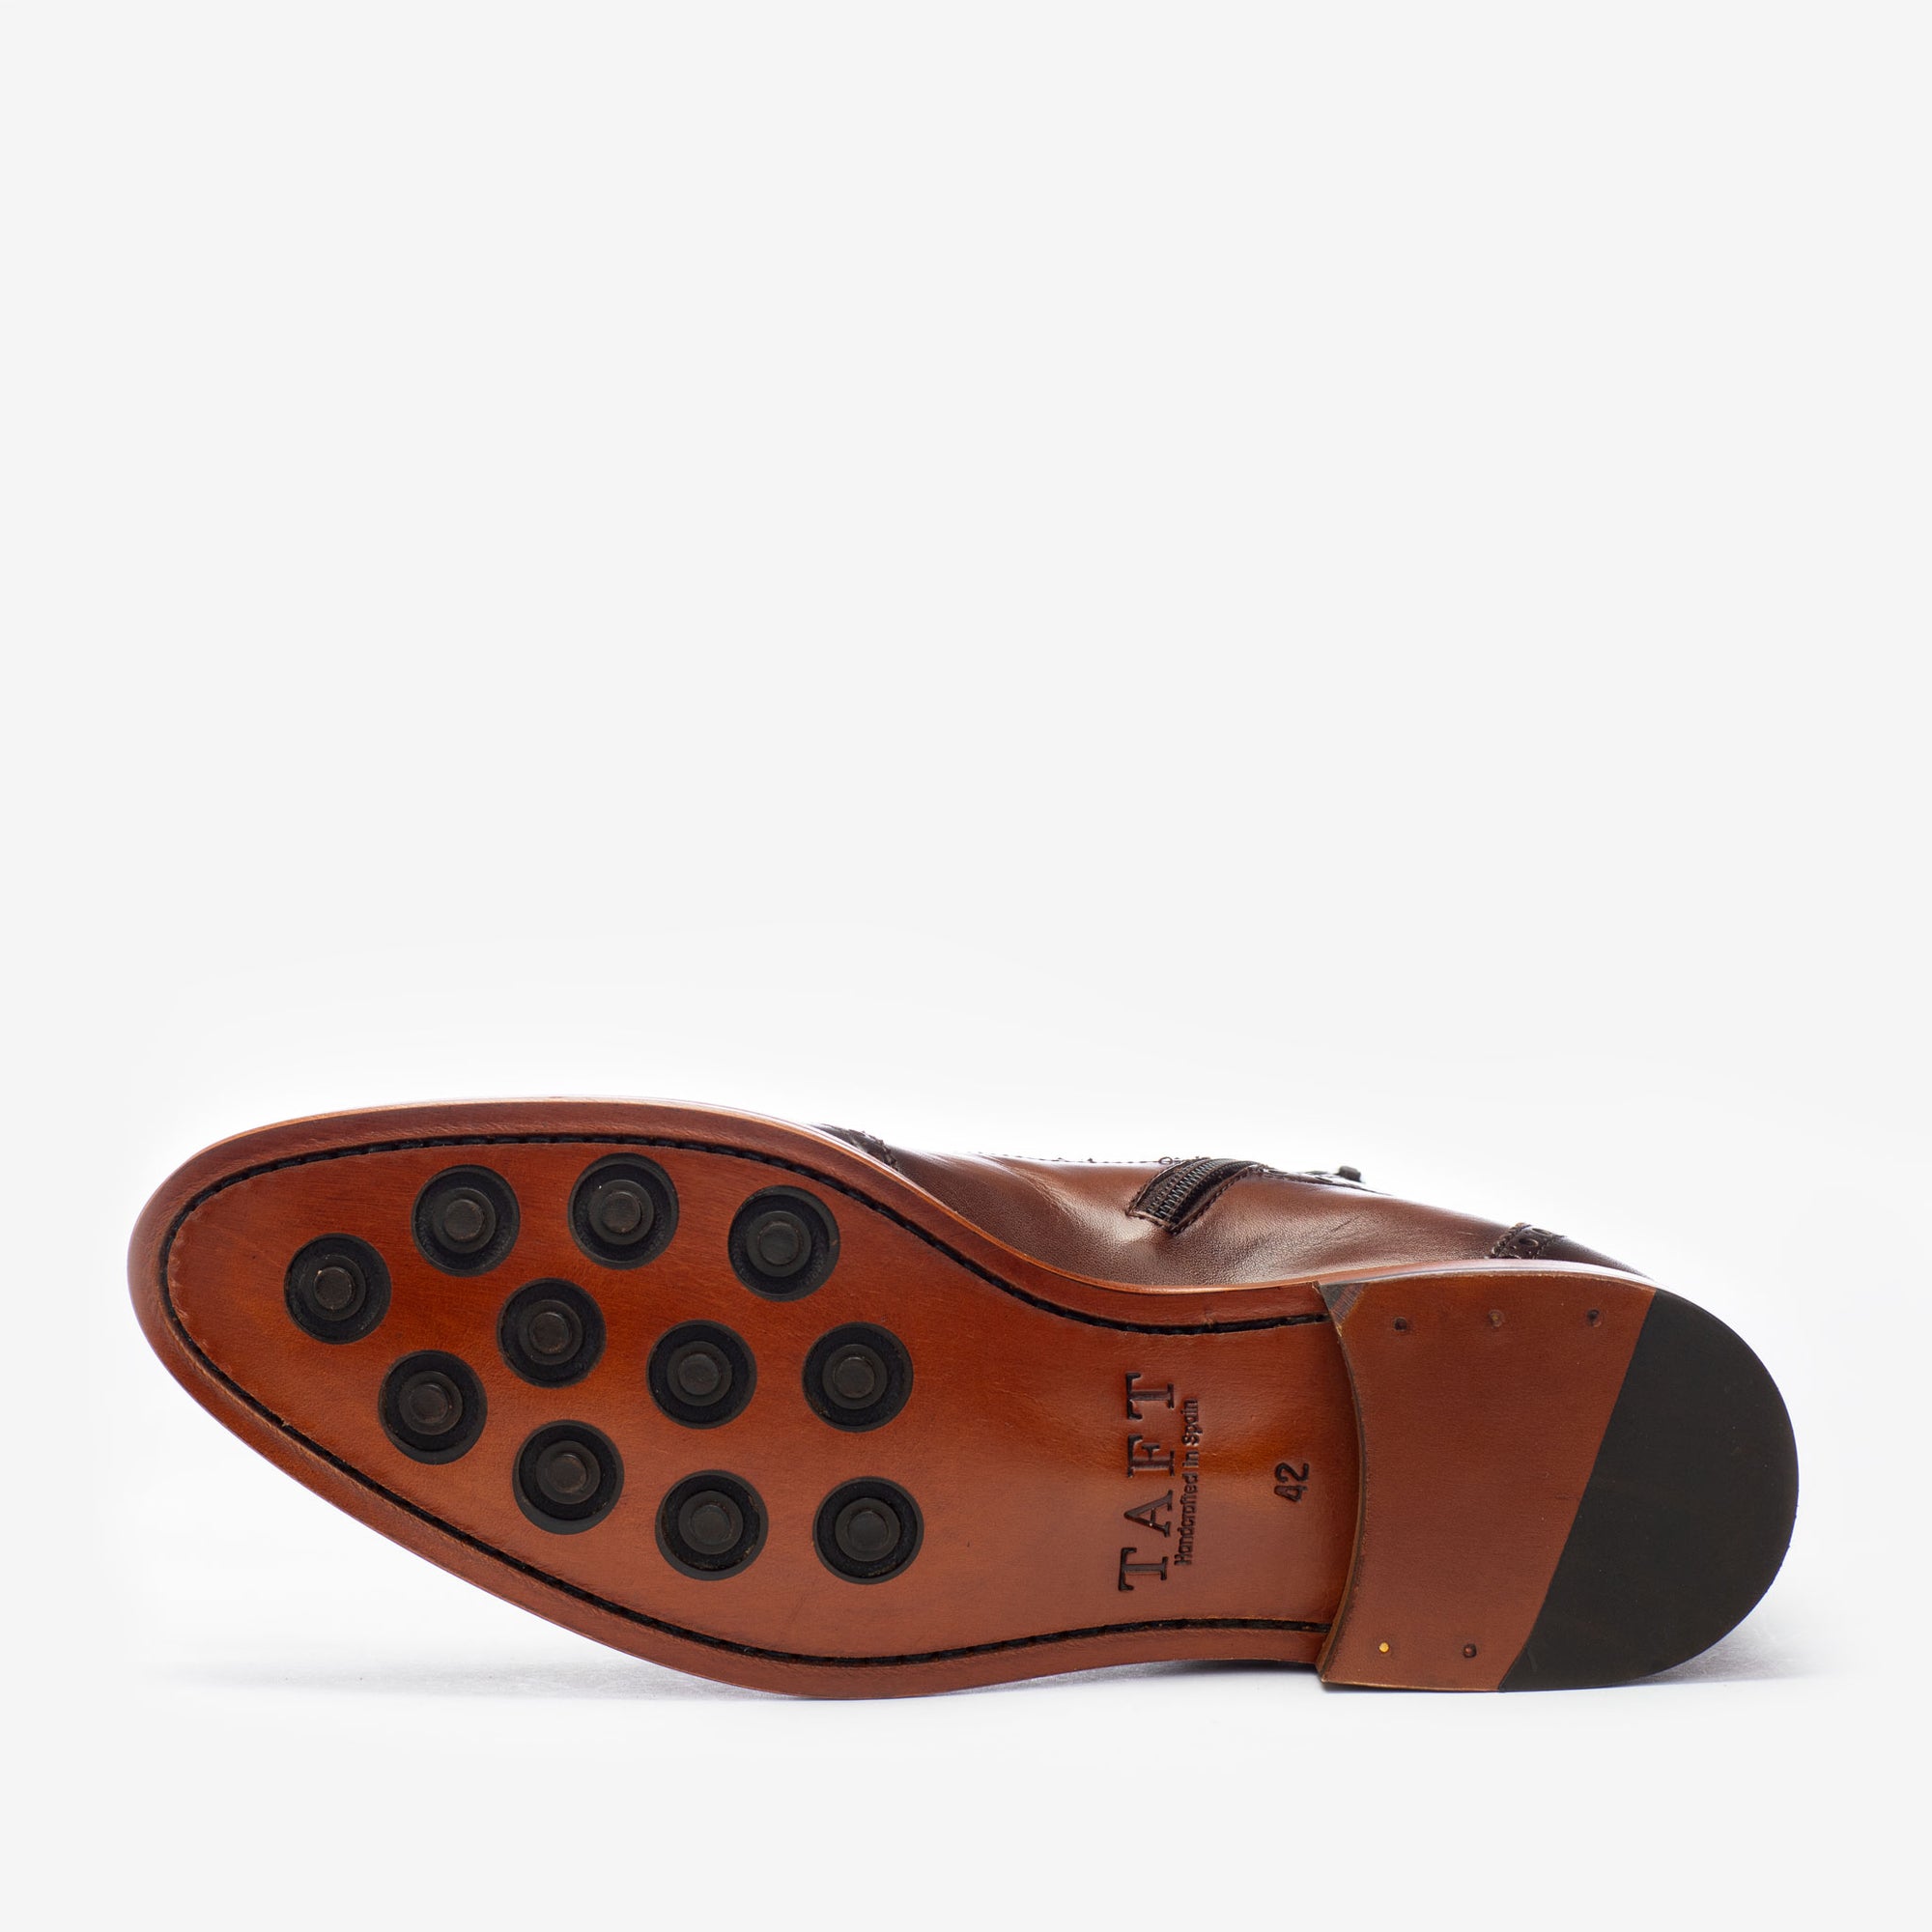 The Dustin Boot in Chocolate, sole